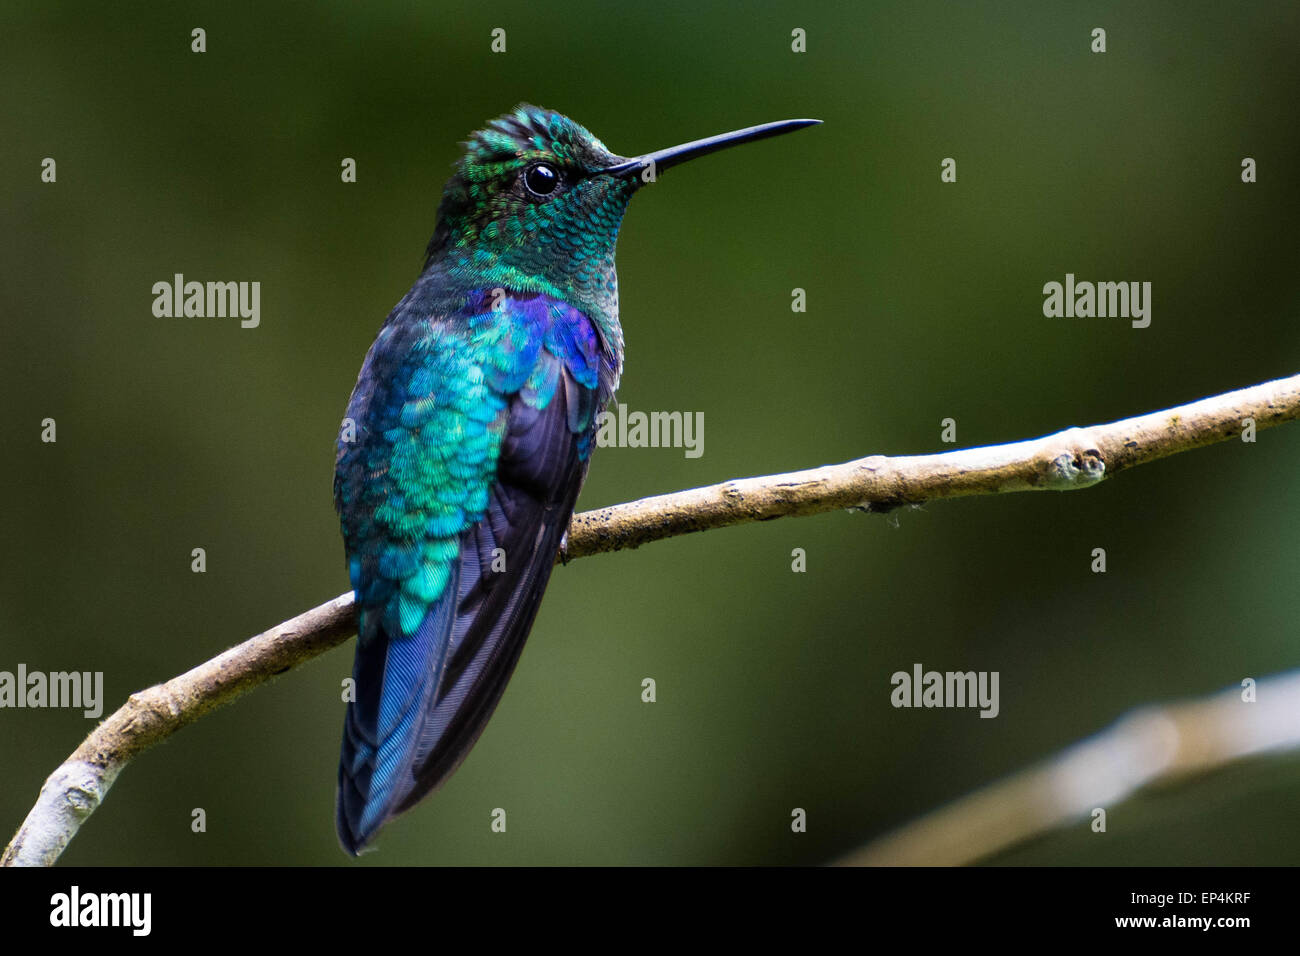 A Violet-bellied hummingbird (Juliamyia julie) perches on a branch in the tropical forest of Mindo, Ecuador. Stock Photo